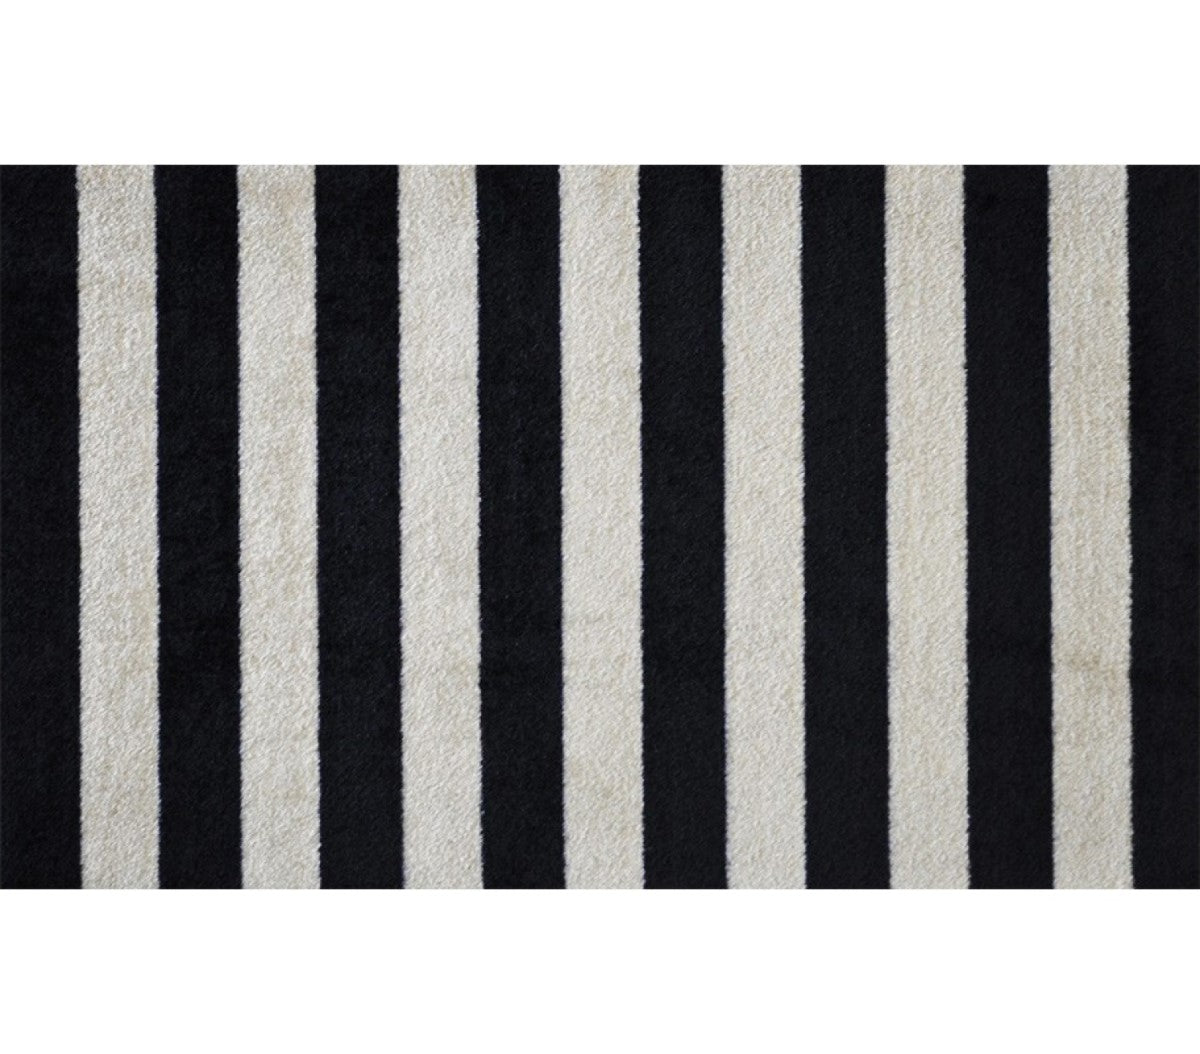 2' x 4' Black and Tan Wide Stripe Washable Floor Mat